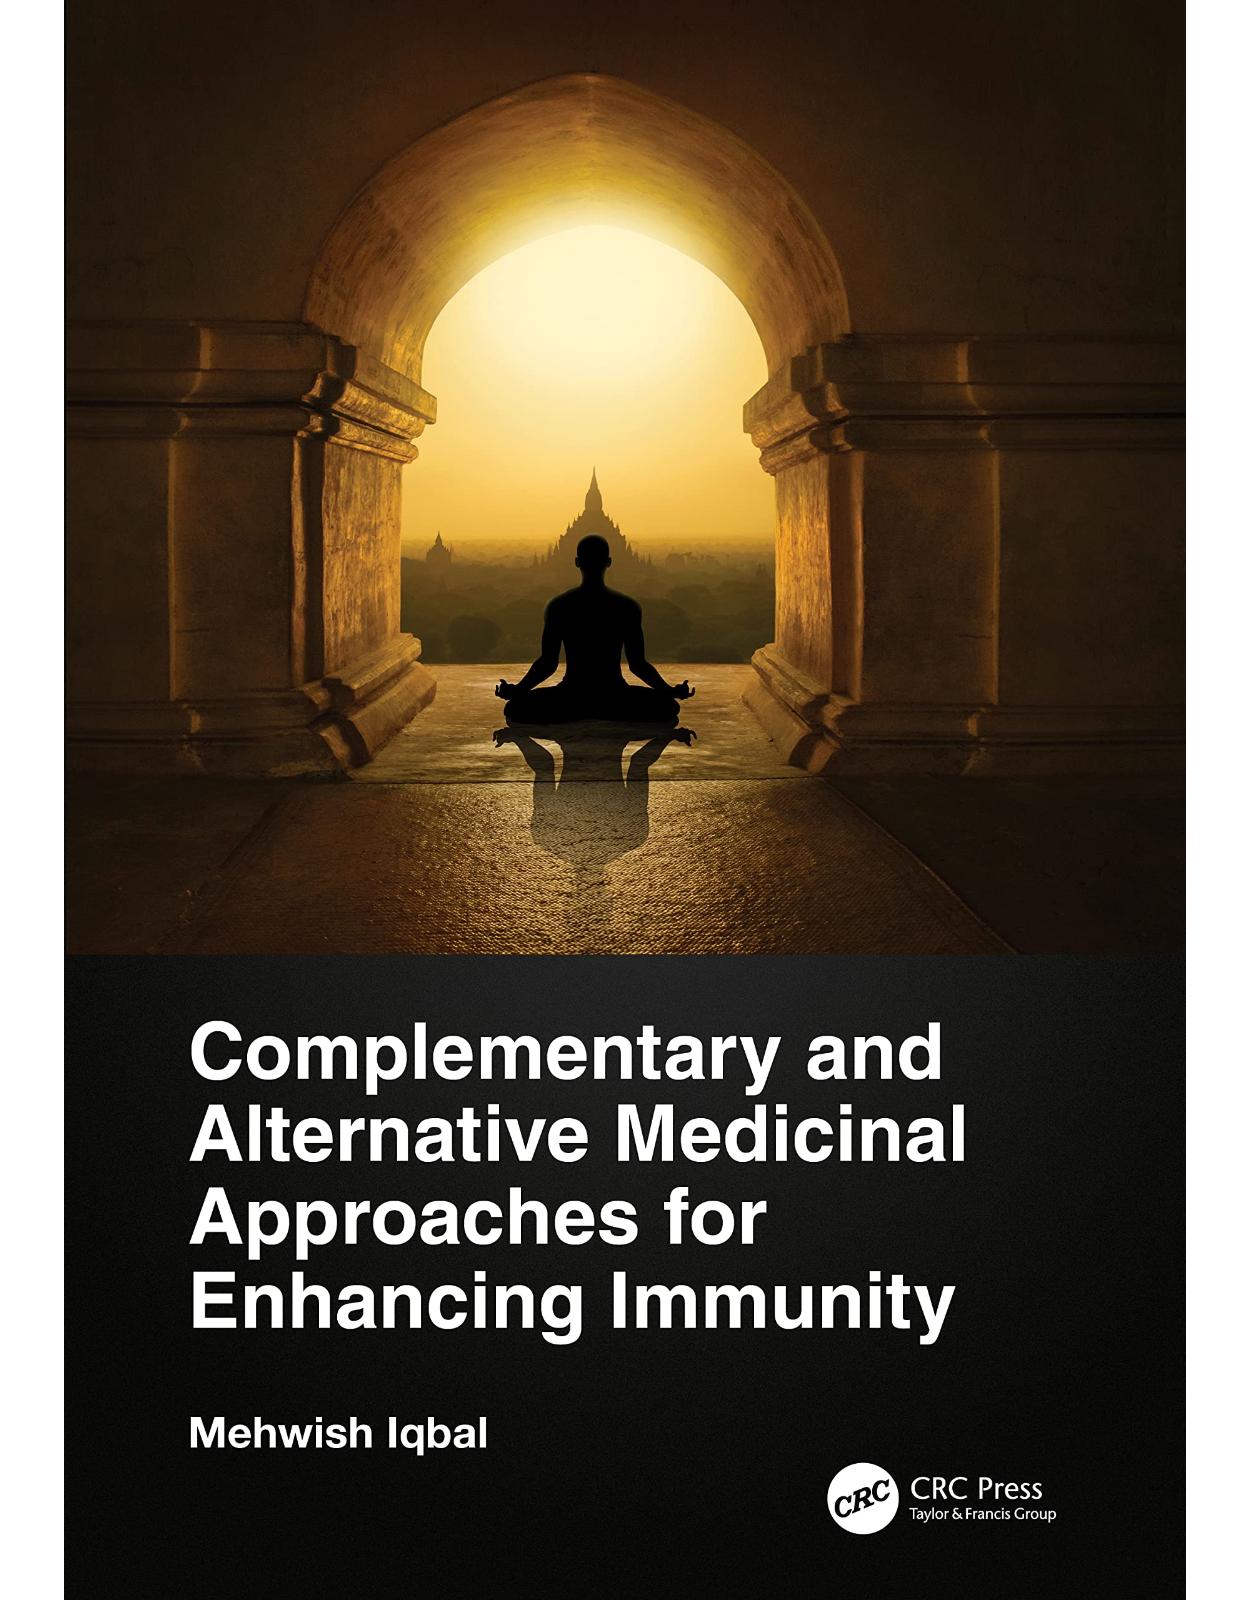 Complementary and Alternative Medicinal Approaches for Enhancing Immunity